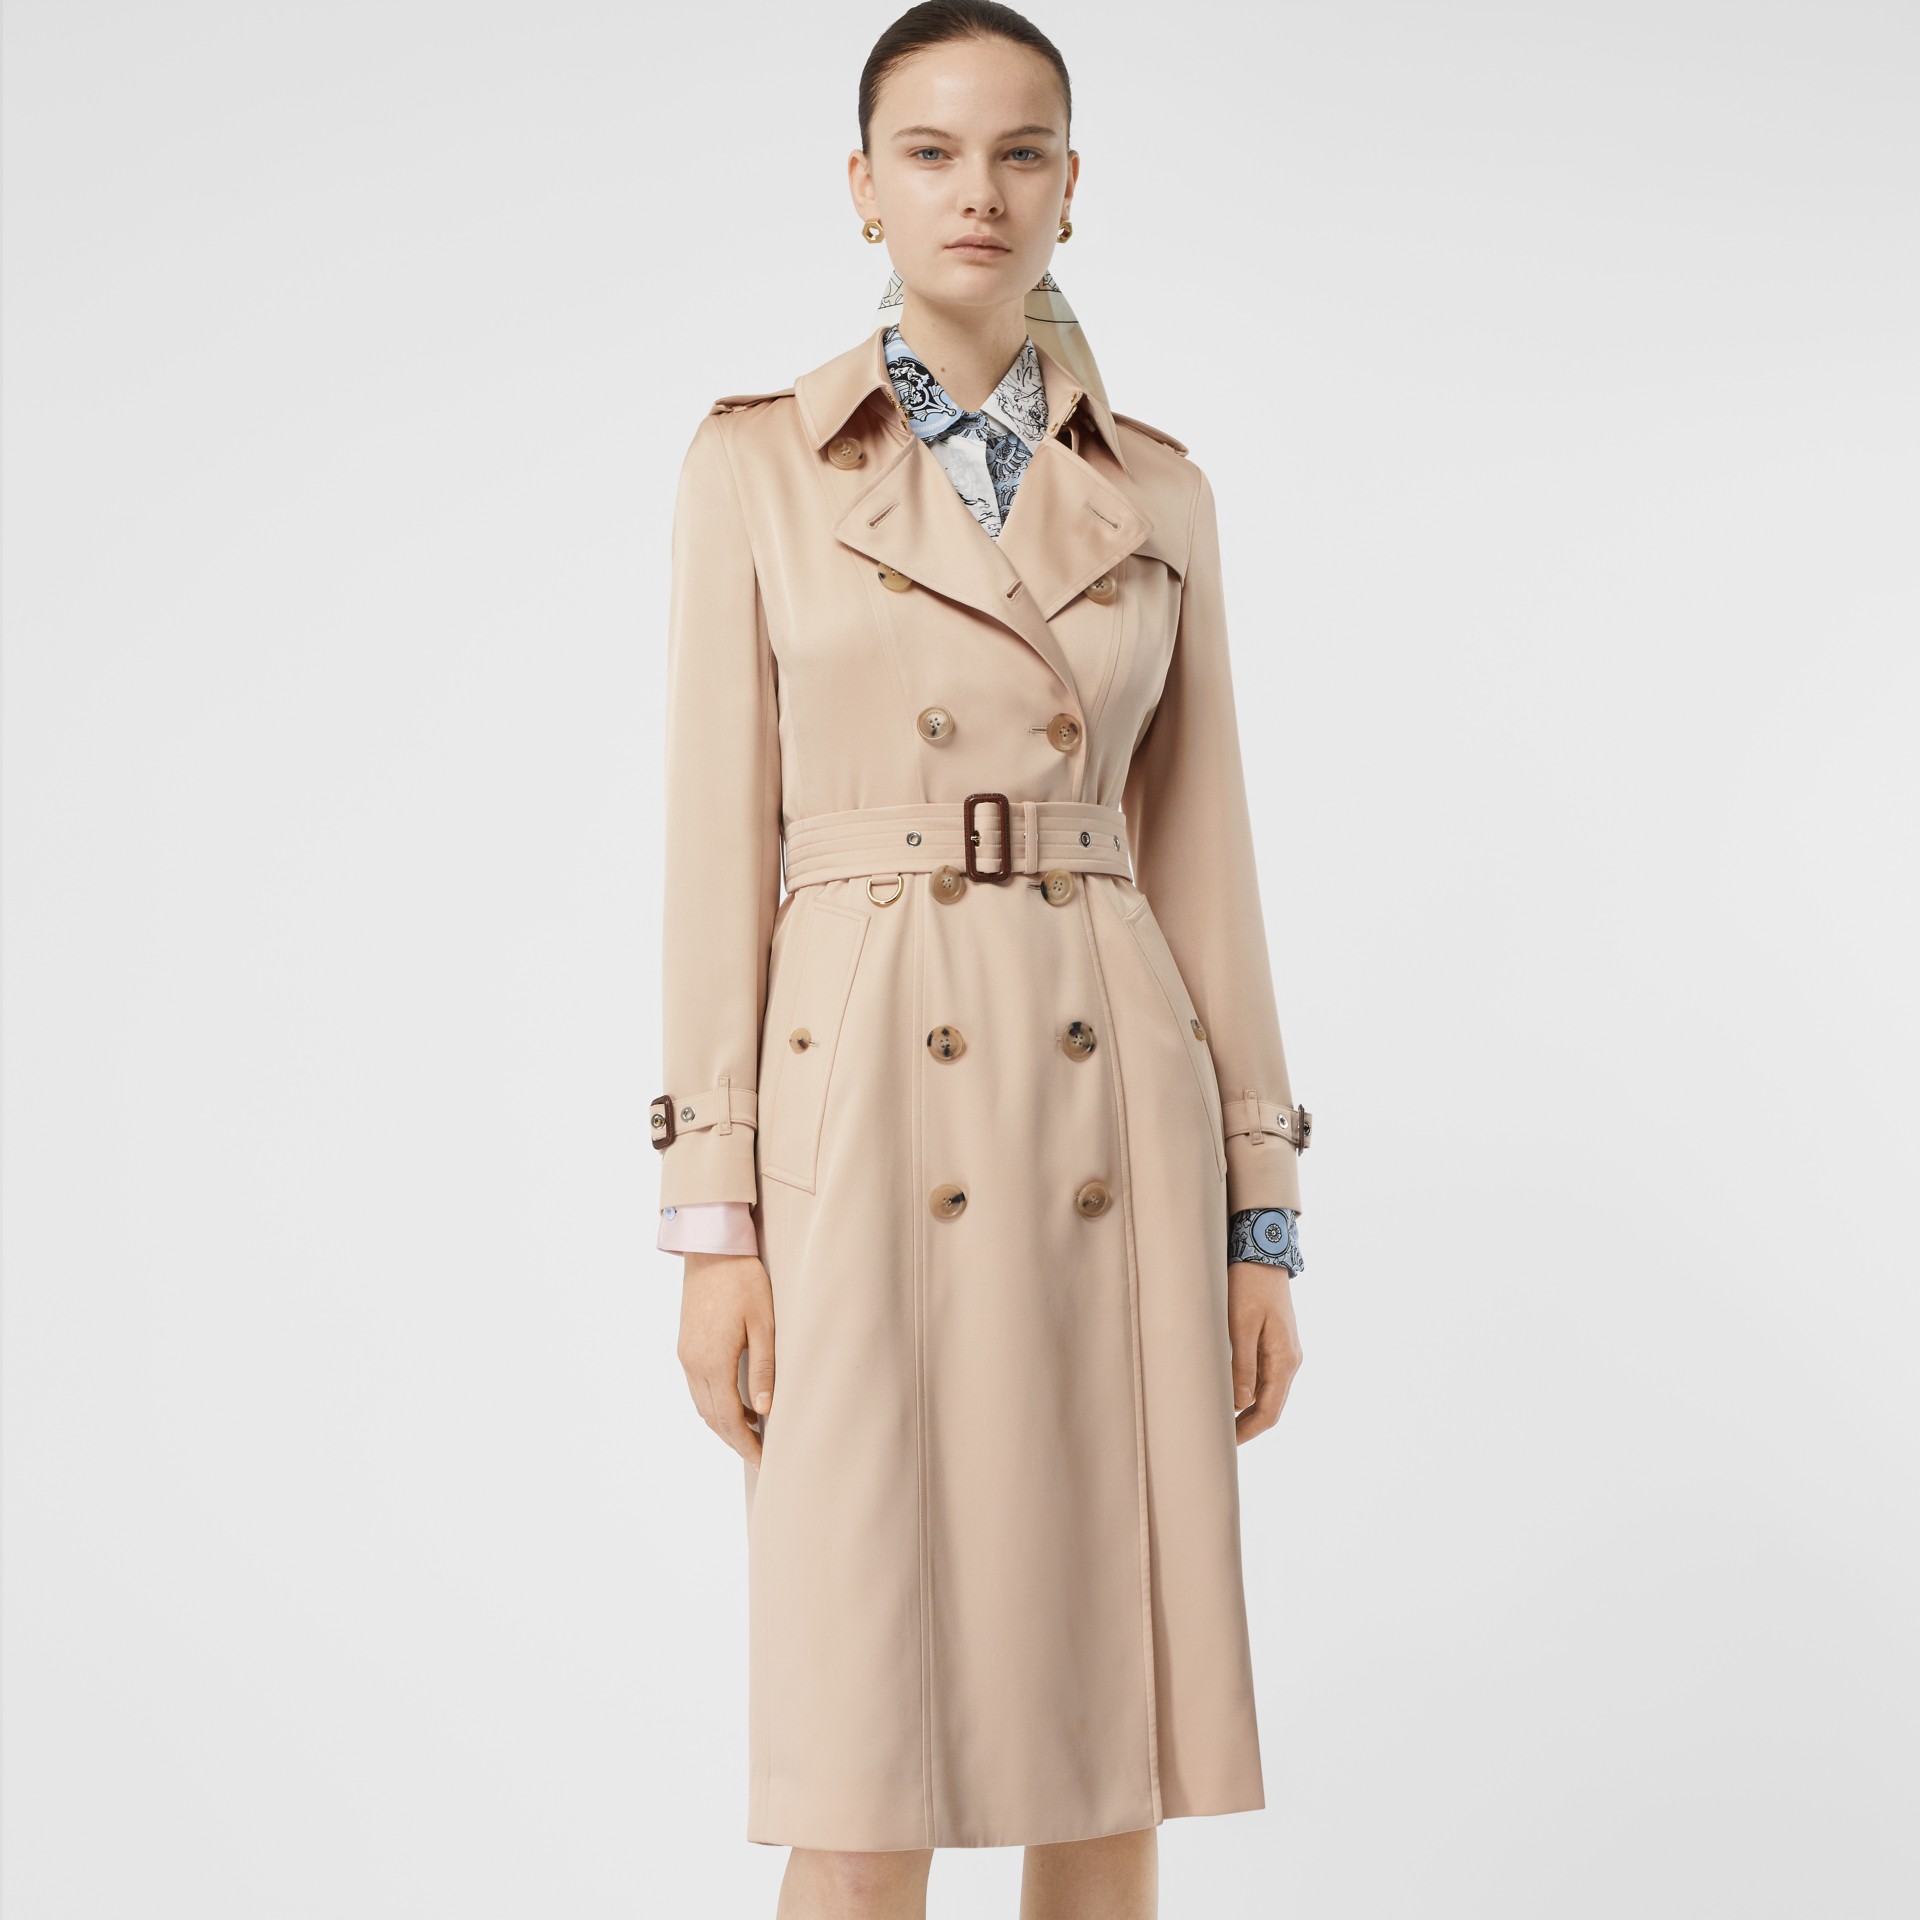 Silk Satin Trench Coat in Pale Blush - Women | Burberry United States